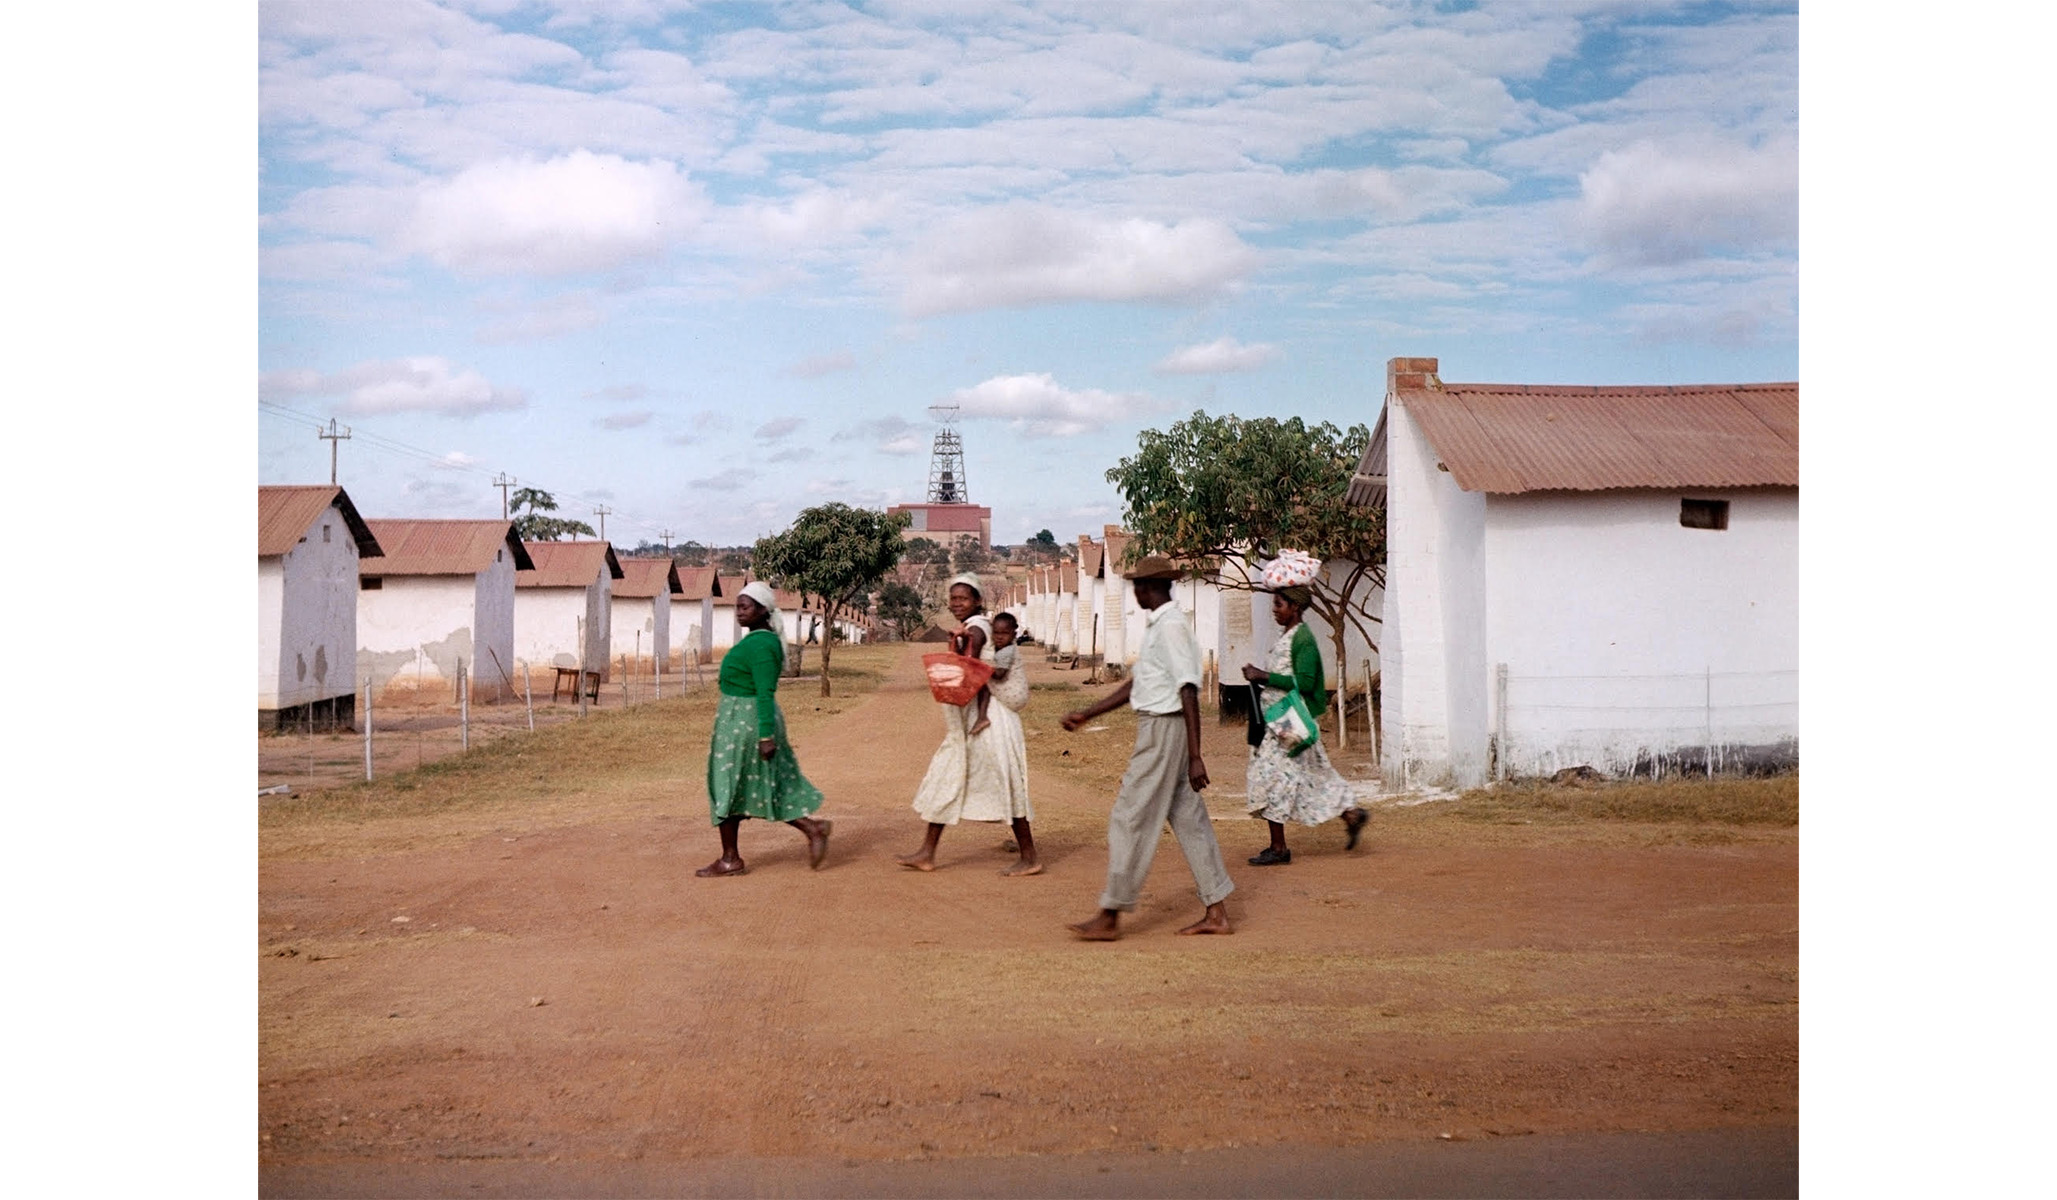 Webb’s Africa meant workers going to work, modern housing, and lots of color. (Courtesy of the Todd Webb Archive, © Todd Webb Archive)